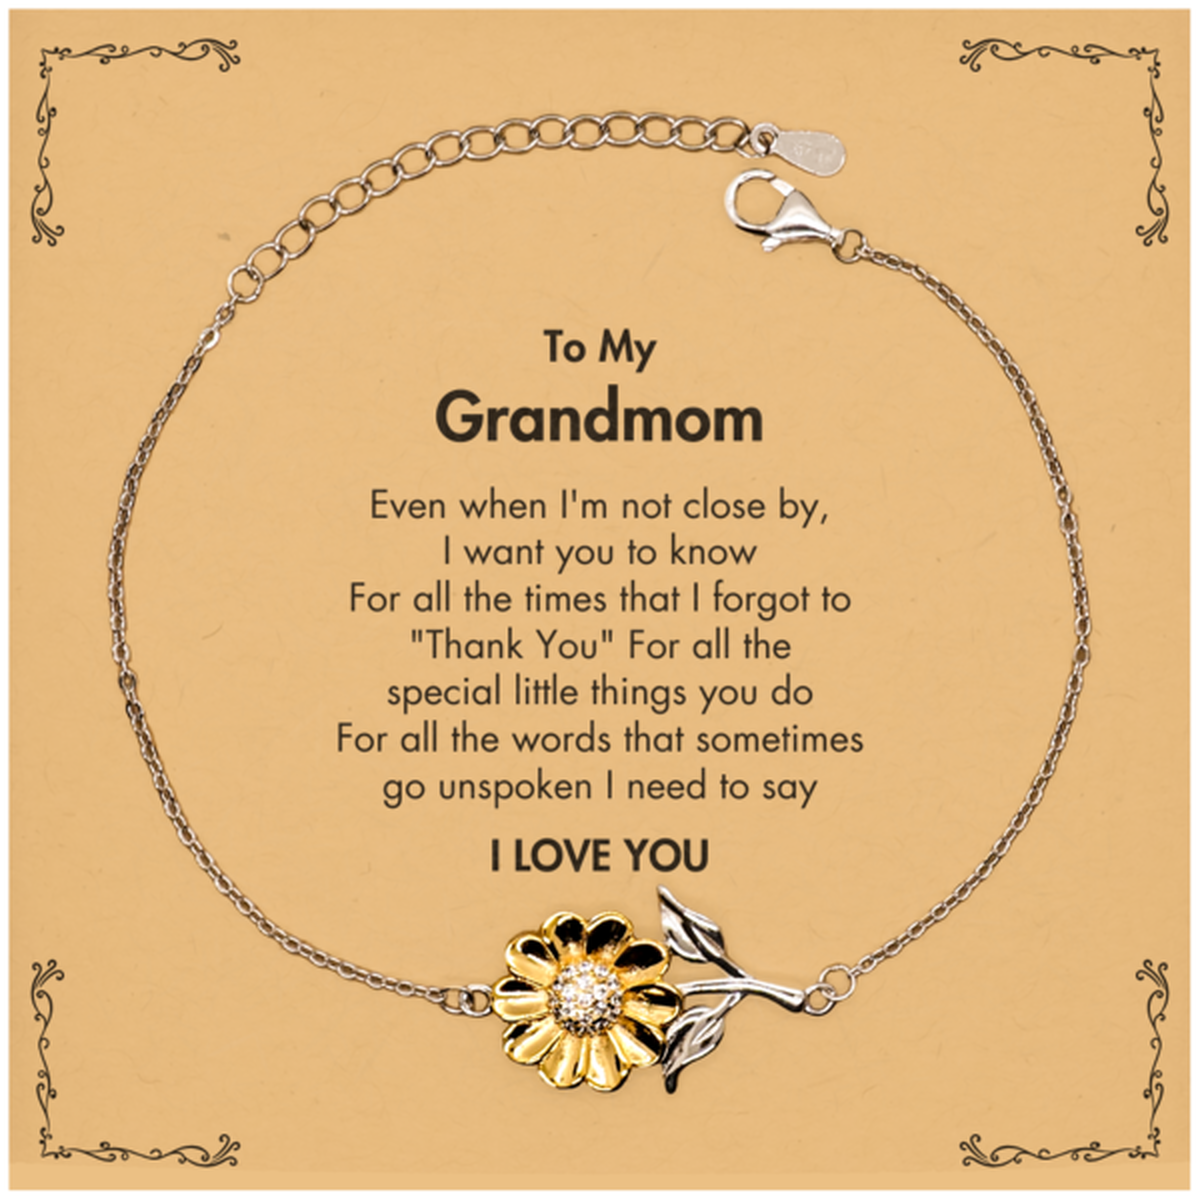 Thank You Gifts for Grandmom, Keepsake Sunflower Bracelet Gifts for Grandmom Birthday Mother's day Father's Day Grandmom For all the words That sometimes go unspoken I need to say I LOVE YOU